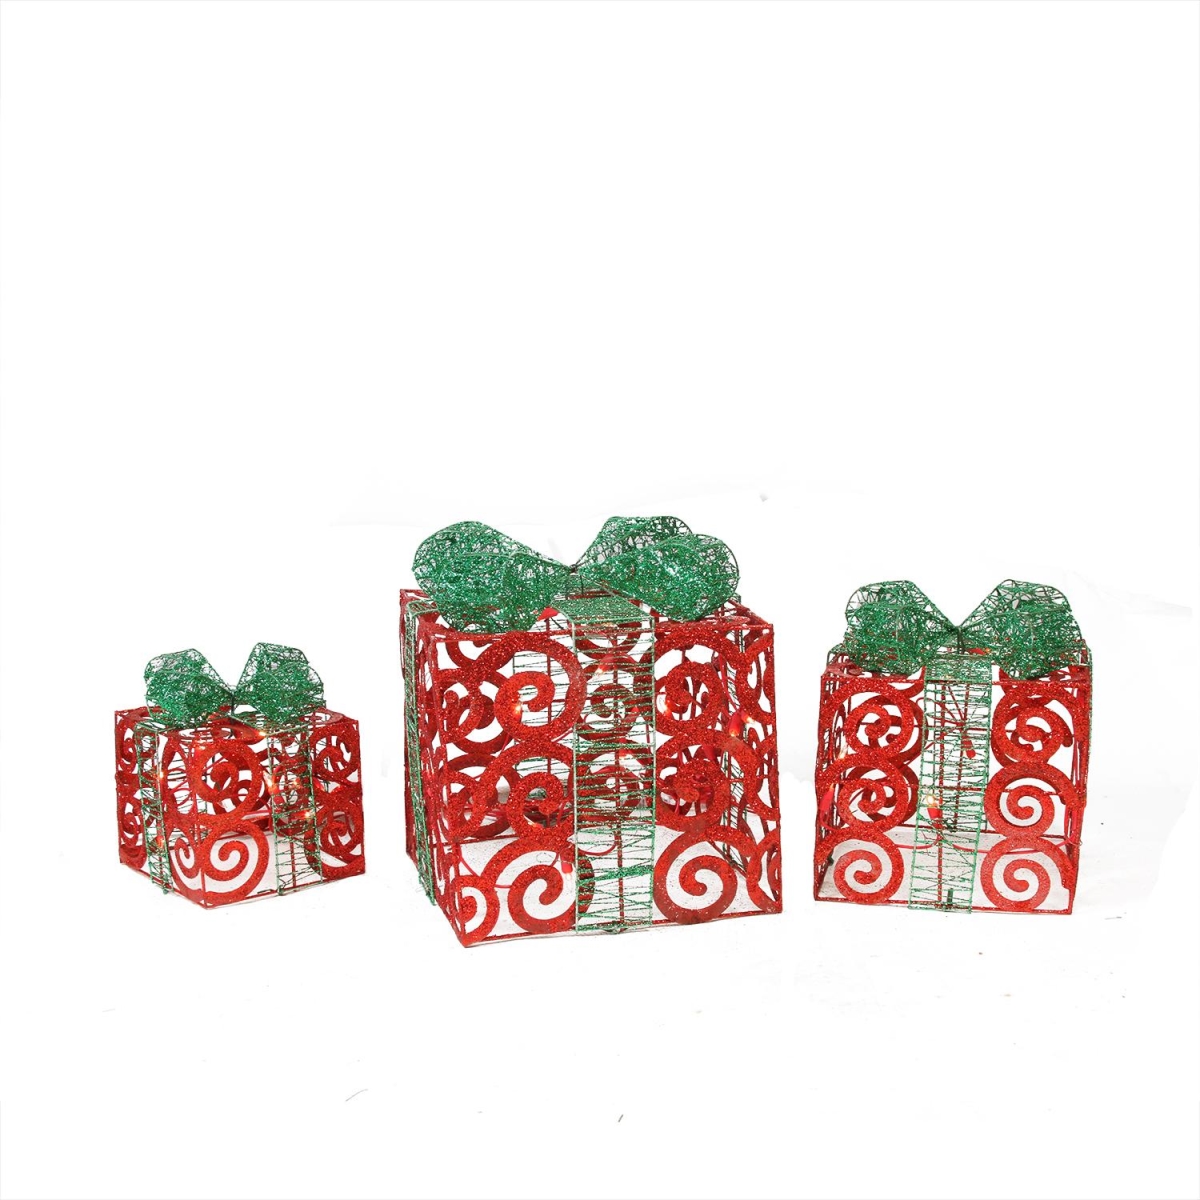 Lighted Sparkling Red Swirl Glitter Gift Boxes Christmas Yard Art Decorations - Set Of 3